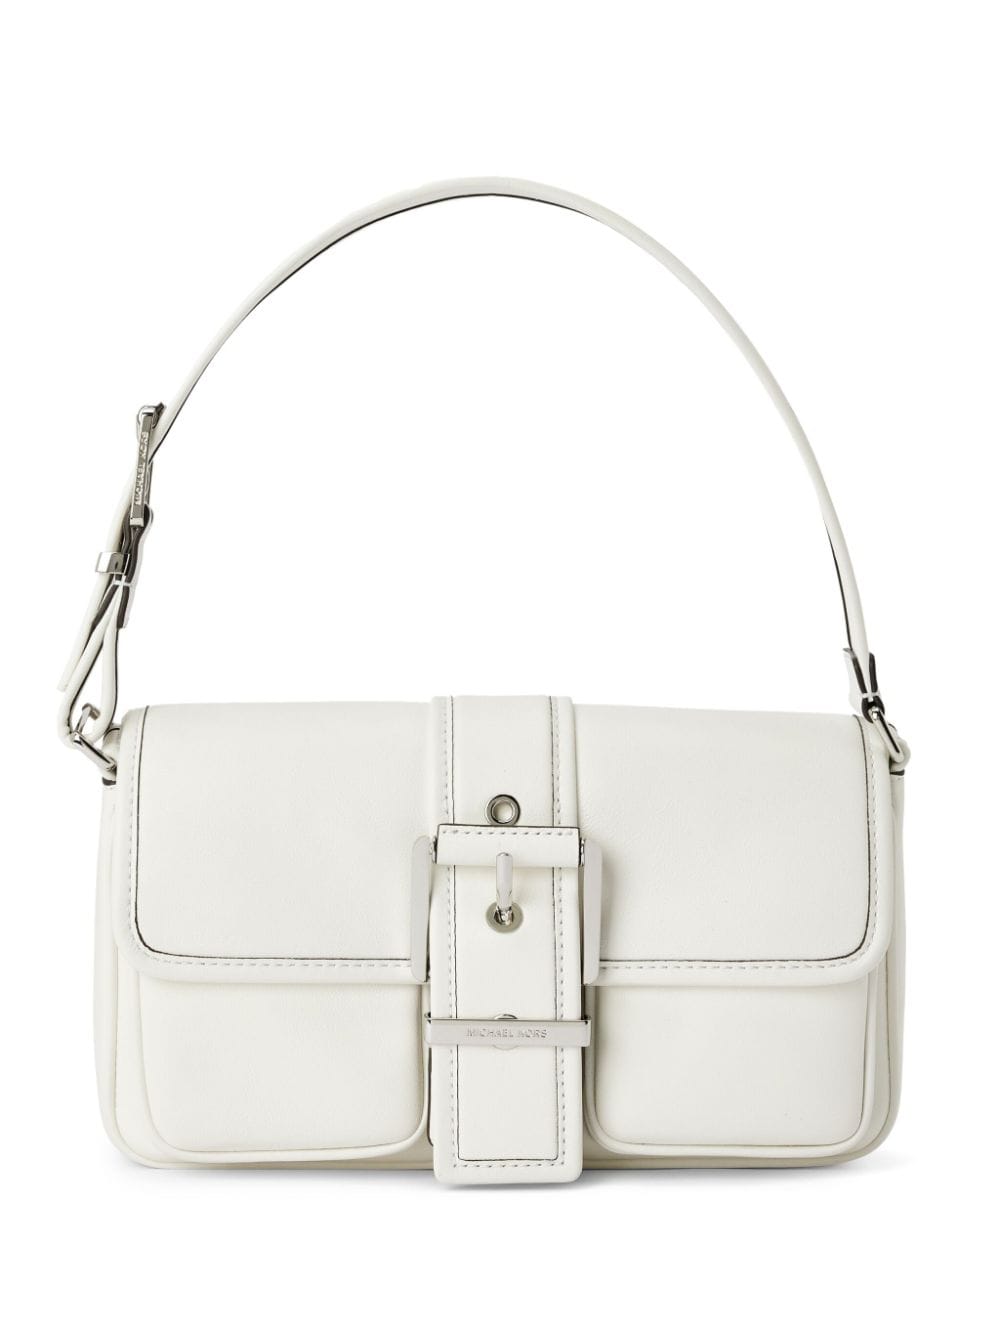 Michael Kors Medium Colby Leather Shoulder Bag In Weiss